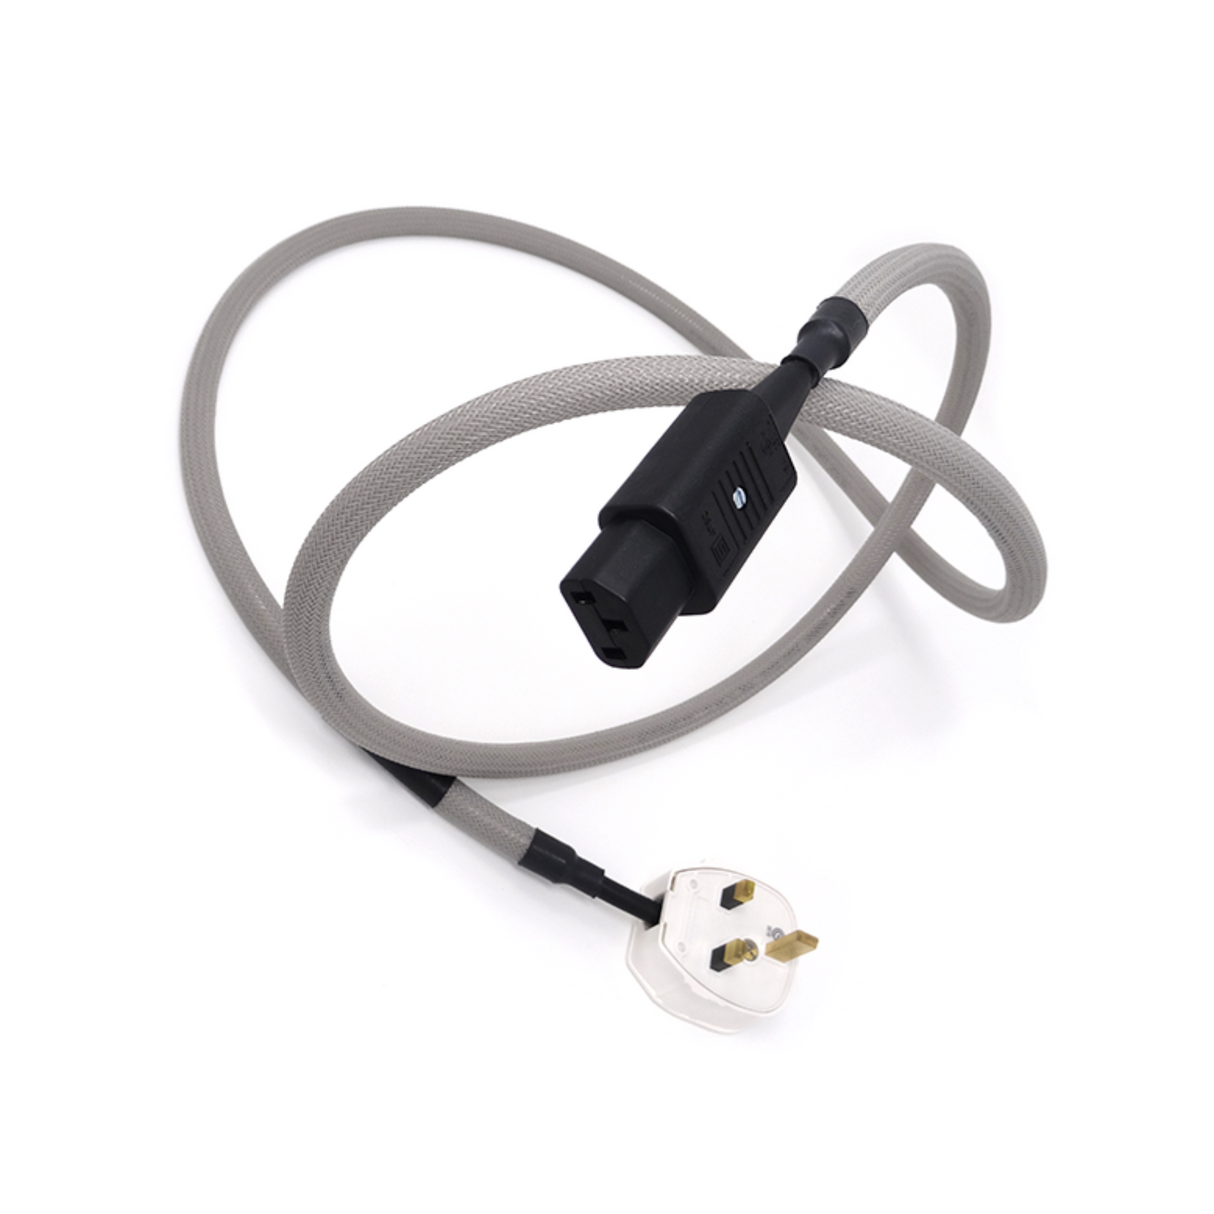 Chord Shawline Shielded Mains Cable